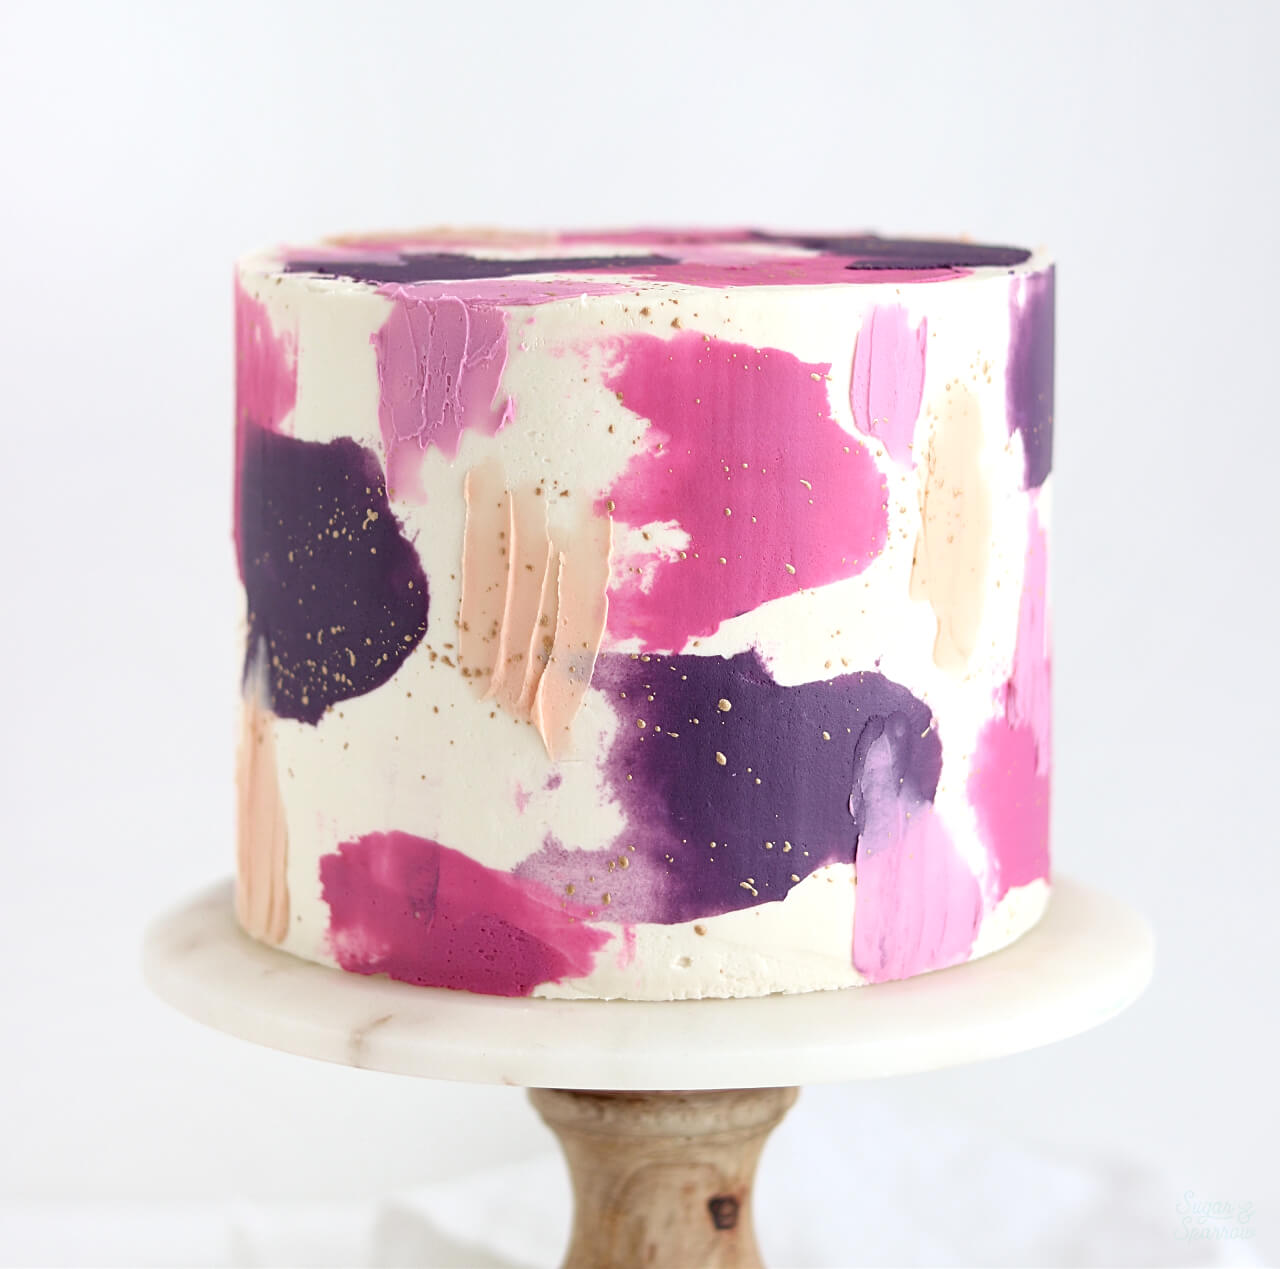 Painted buttercream cake by Sugar and Sparrow